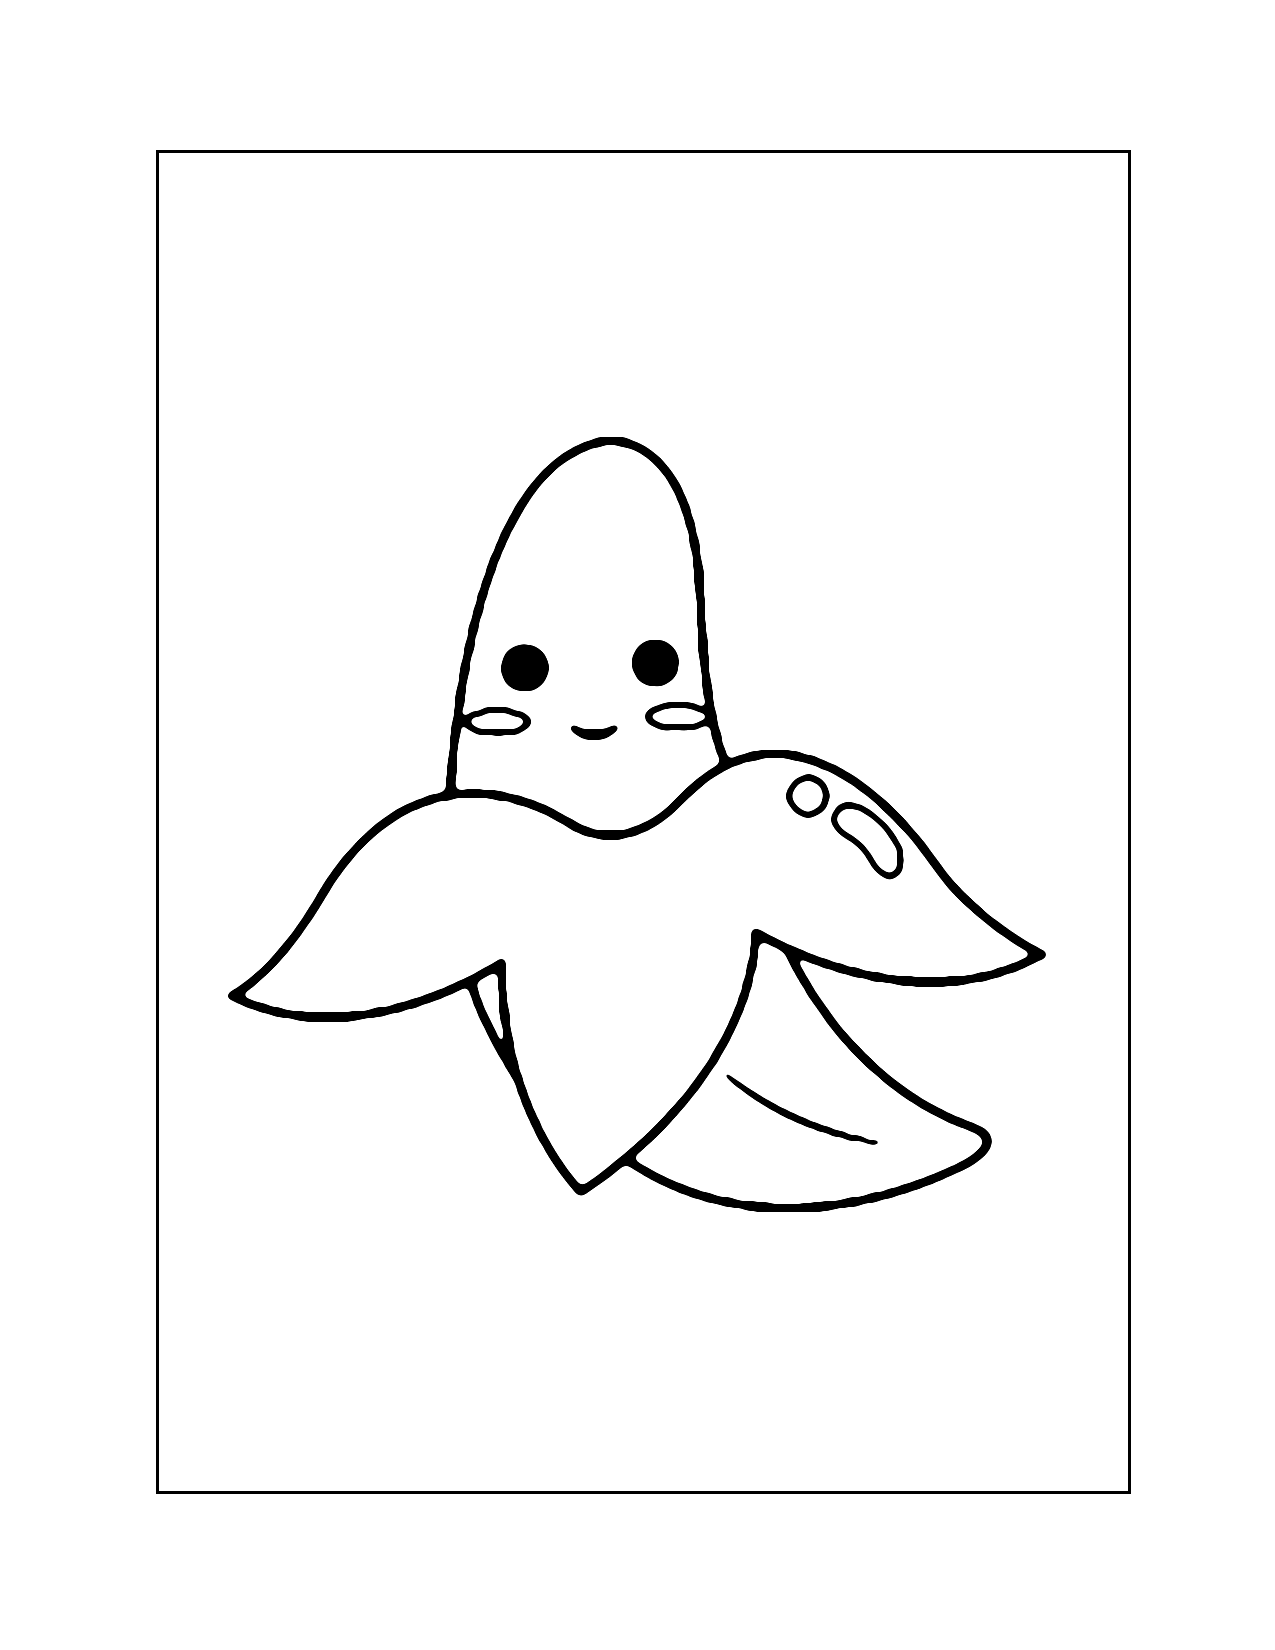 The Cutest Banana Coloring Page